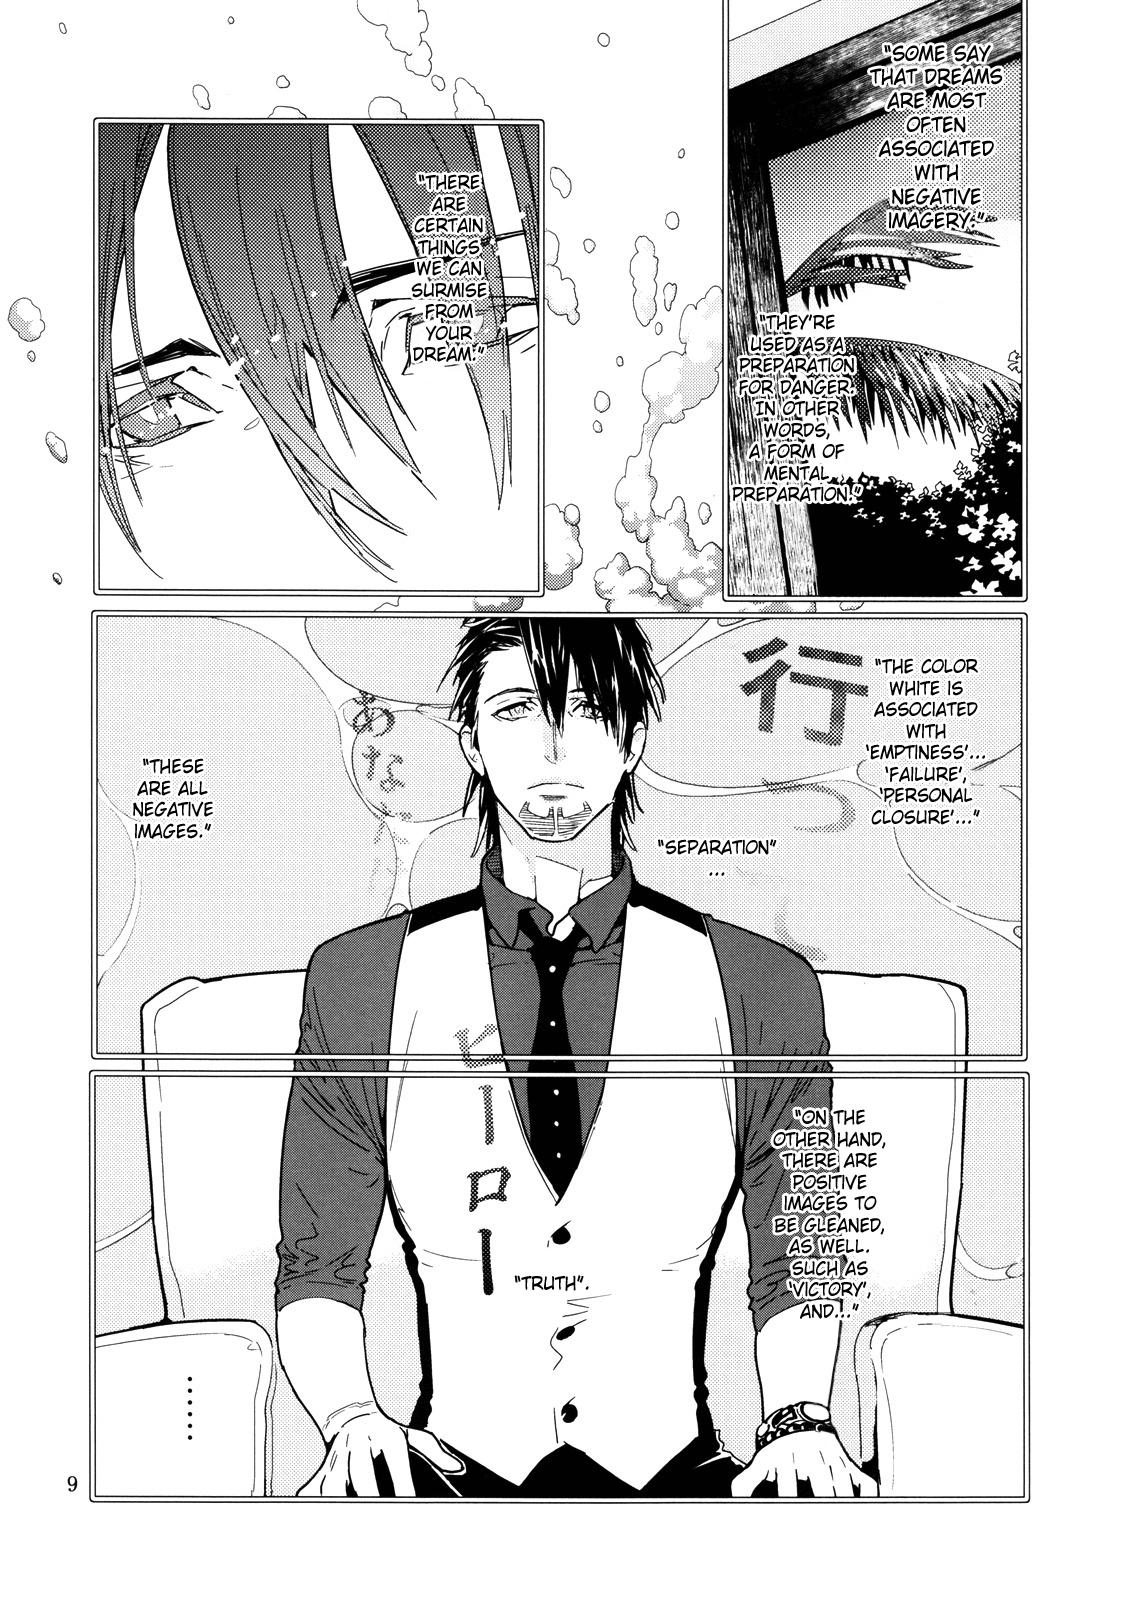 Load Candy Man 4 - Tiger and bunny Blackdick - Page 8